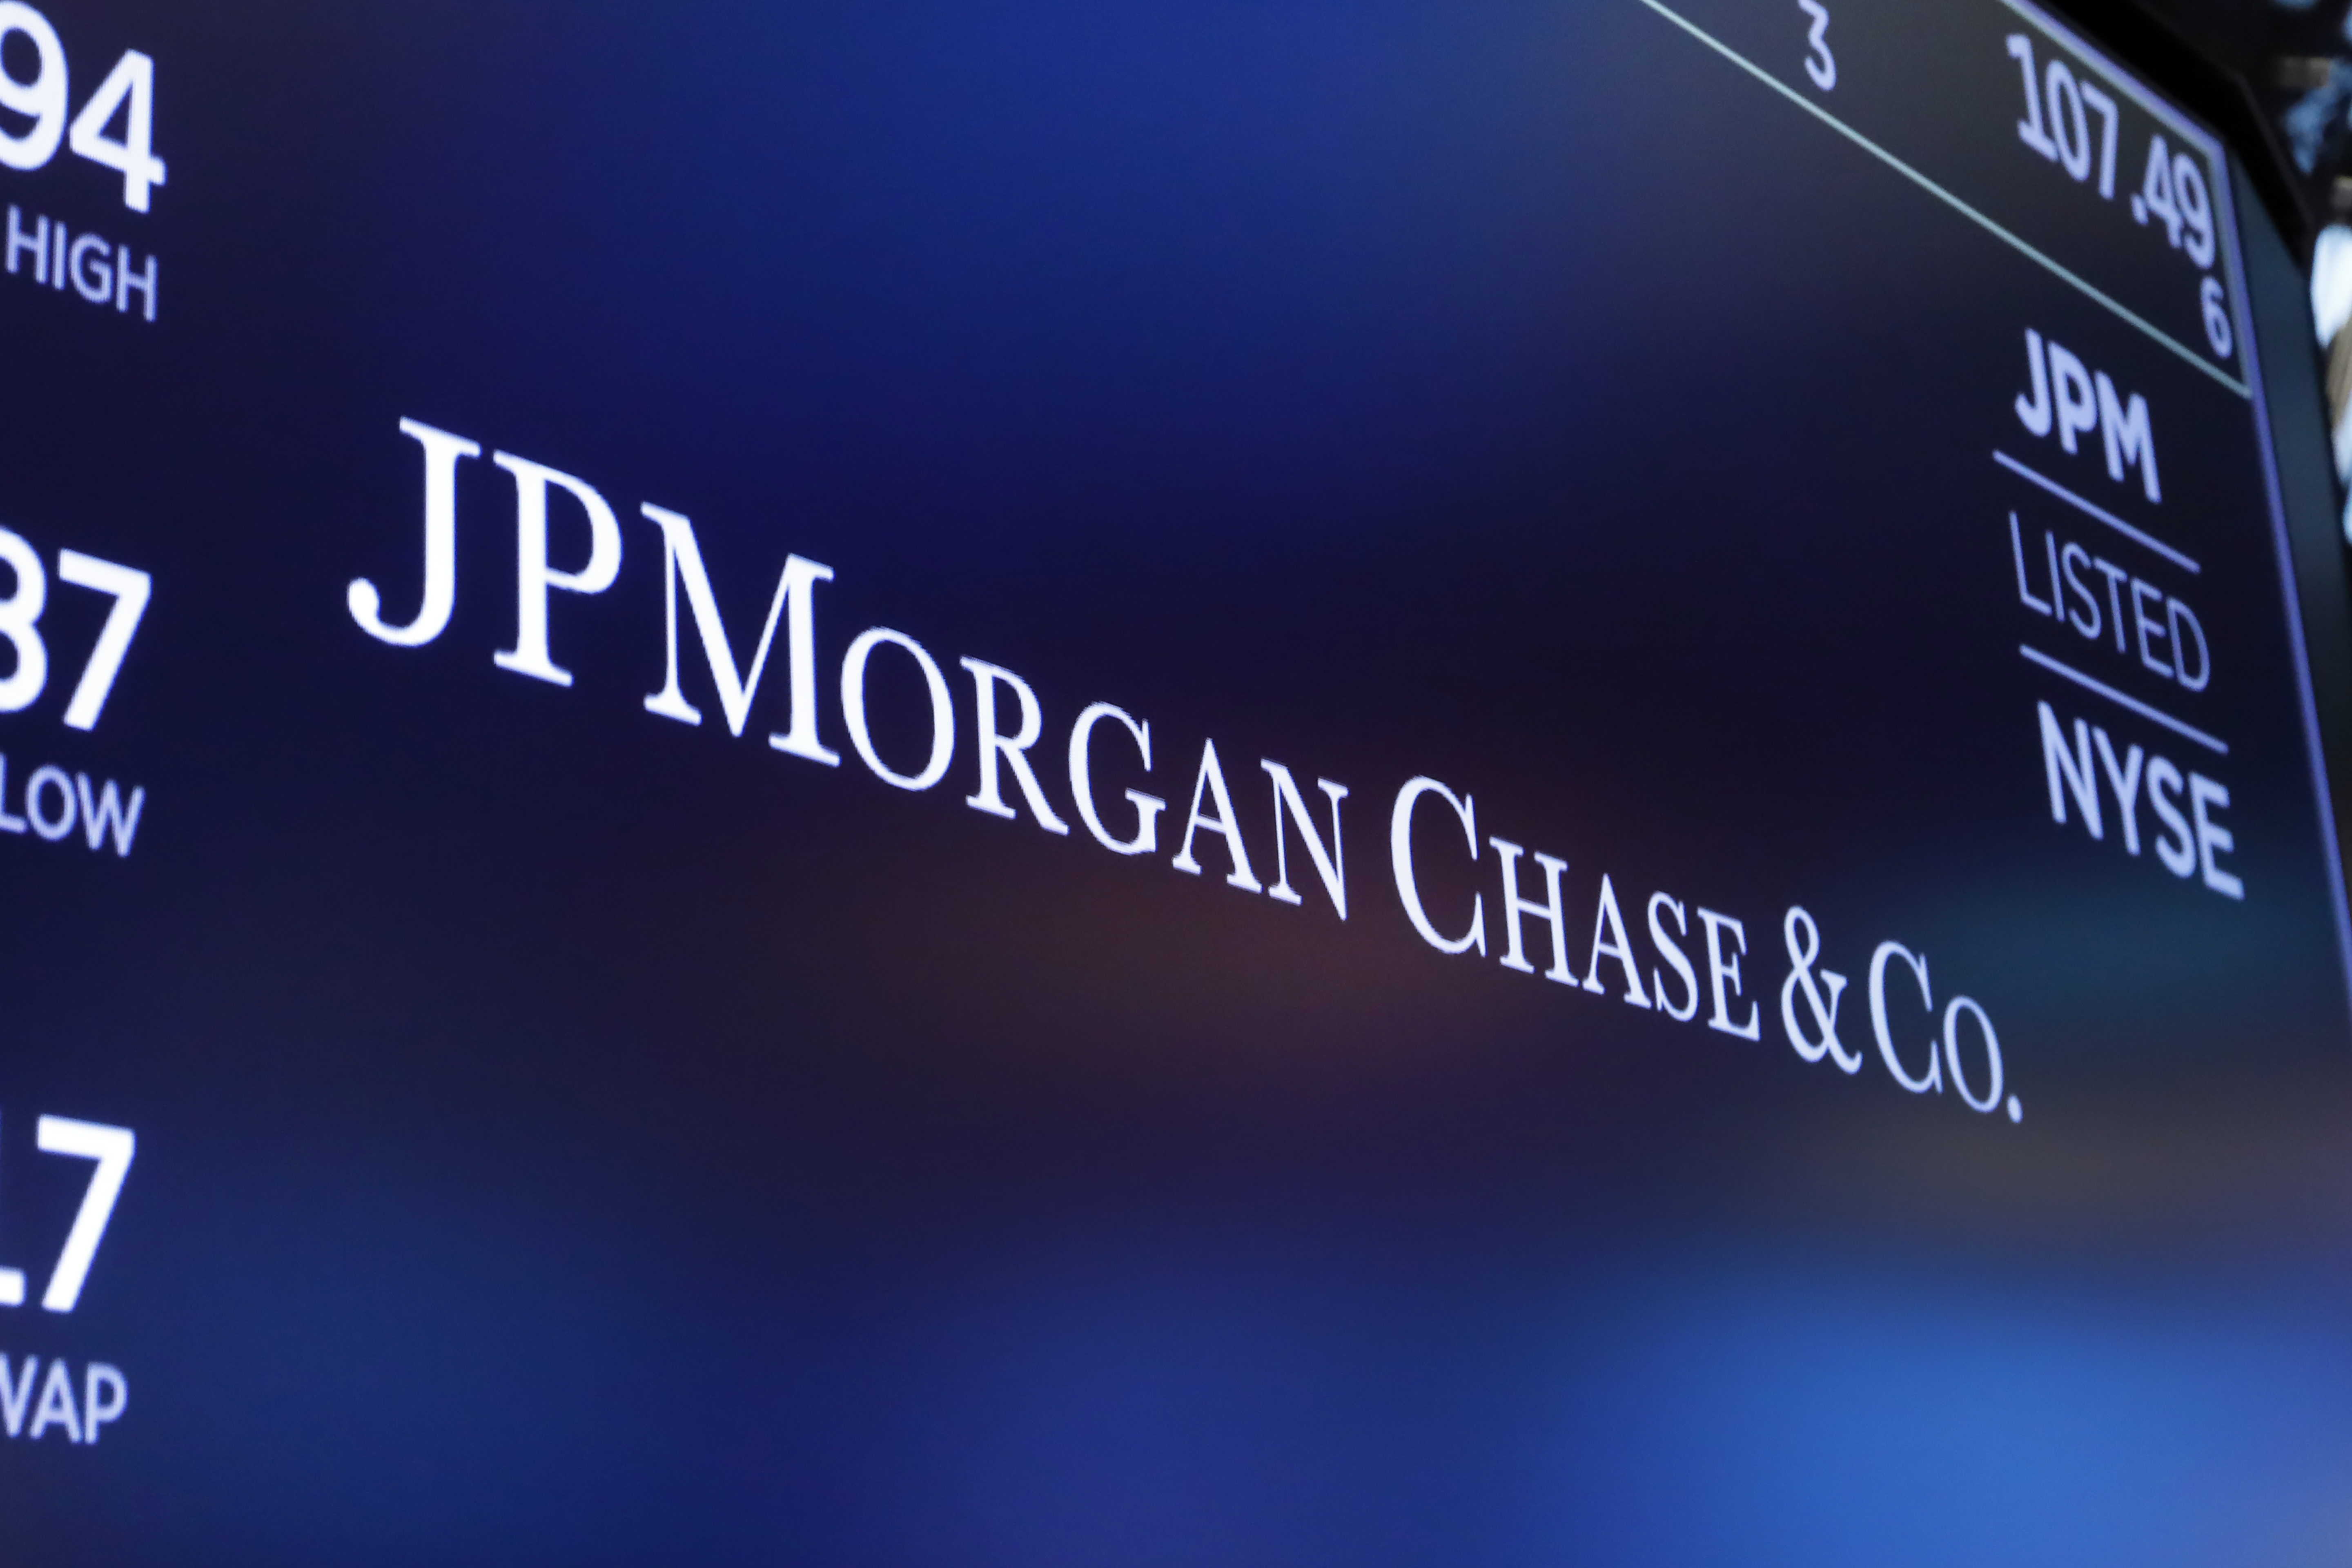 FILE - In this Aug. 16, 2019, file photo, the logo for JPMorgan Chase &amp; Co. appears above a trading post on the floor of the New York Stock Exchange in New York. JPMorgan Chase said Thursday, Oct. 8, 2020 it will extend billions in loans to Black and Latino homebuyers and small business owners in an expanded effort toward fixing what the bank calls u201csystemic racismu201d in the countryu2019s economic system. Photo: AP